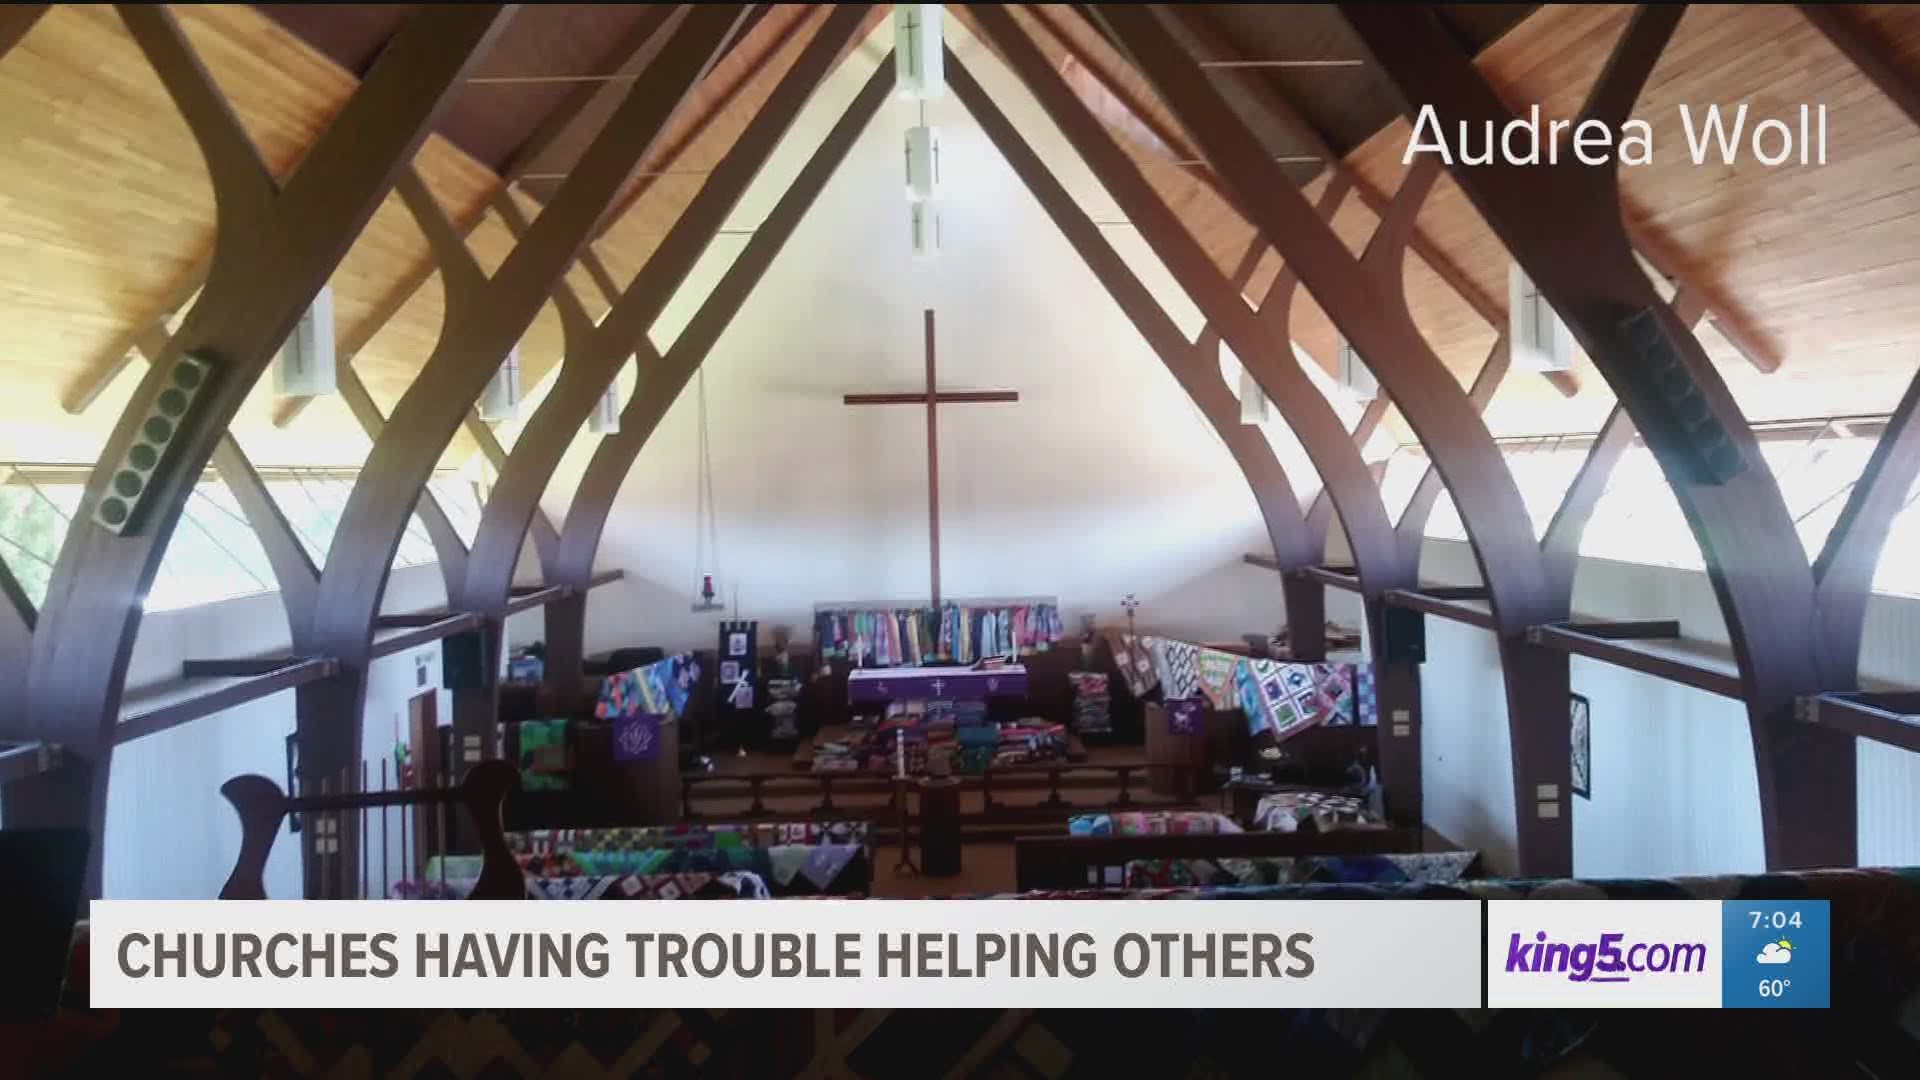 Family Promise of Skagit Valley says many of its church partners have shut down, limiting the organization's capacity to house and feed families.